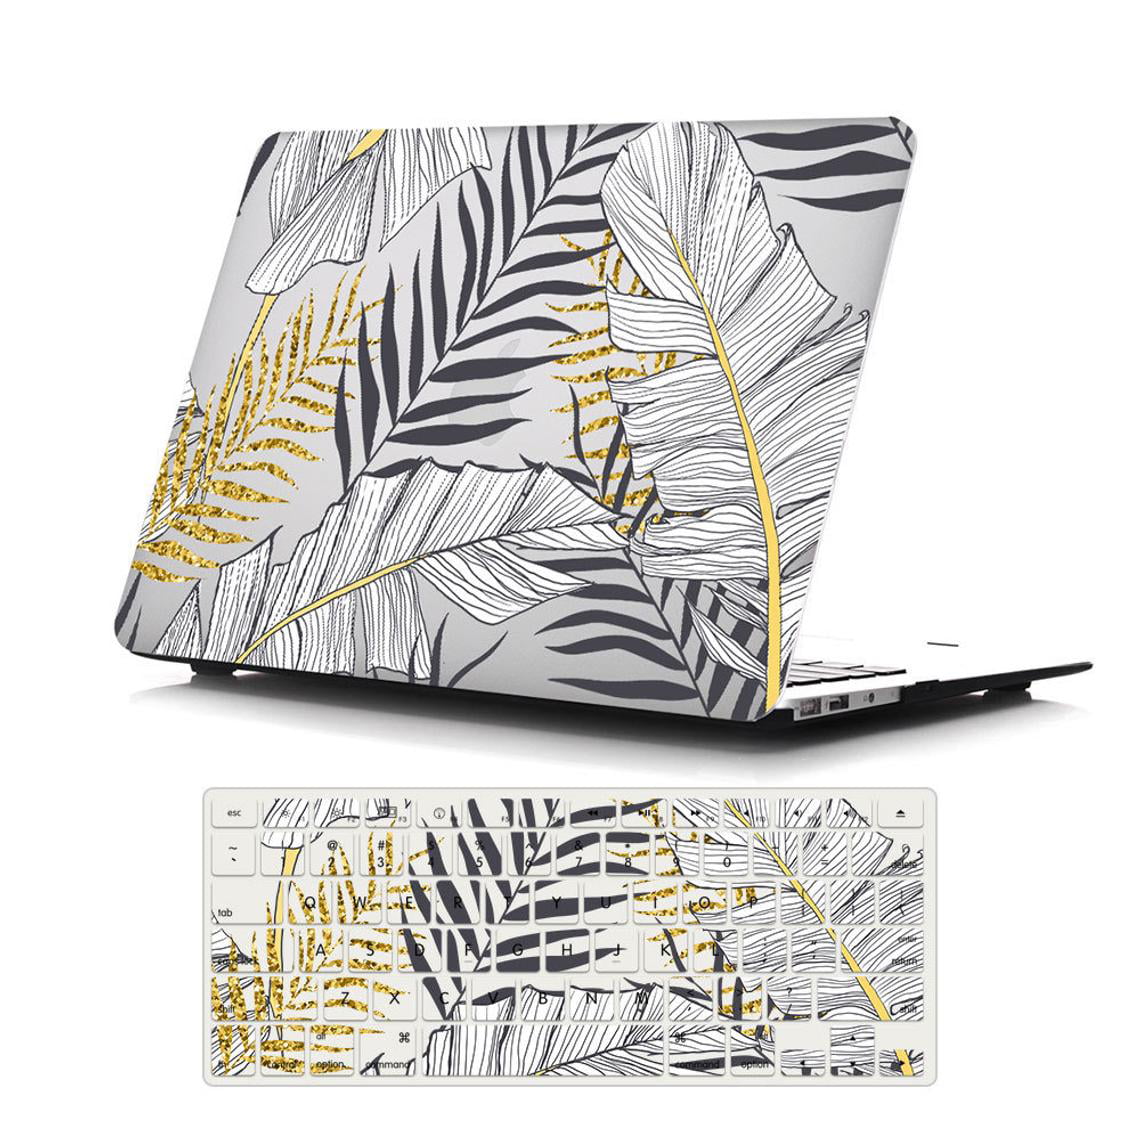 Ink Sketch Floral Pattern Compatible with MacBook Air 13 inch Hard Plastic Shell Cover Case A1932, 2019 2018 Release